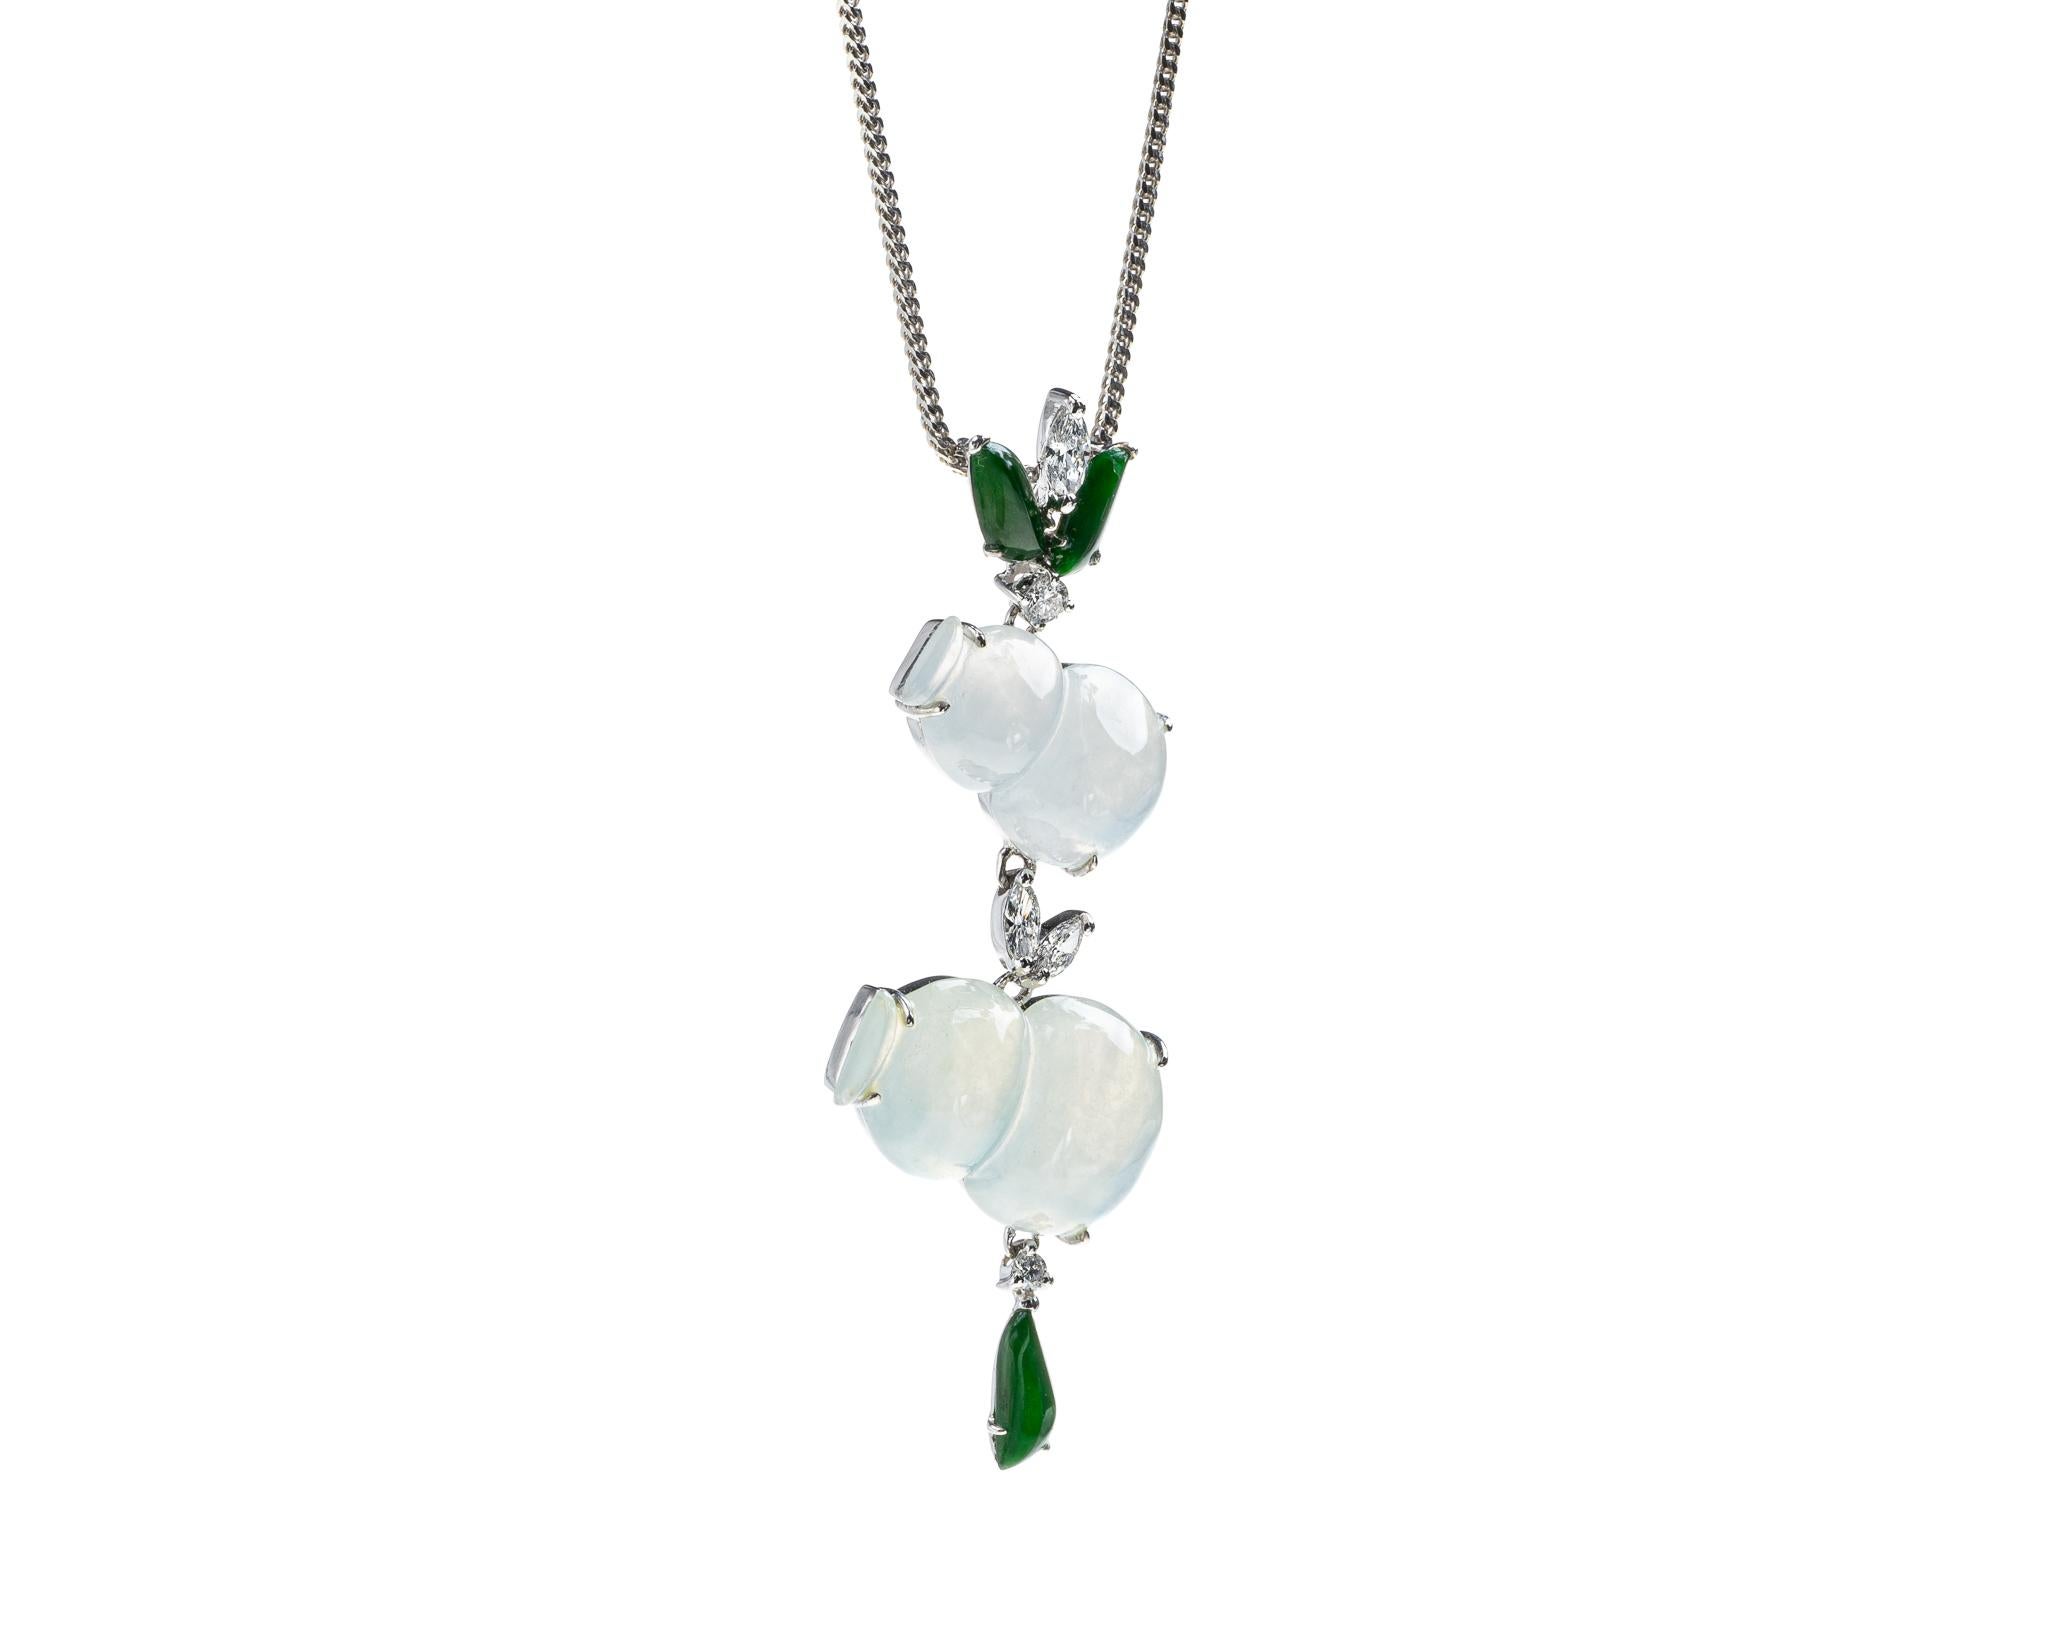 This is an all natural, untreated jadeite jade carved gourd and diamond pendant set on an 18K white gold and diamond bail.  The carved gourd symbolizes protection, great health and longevity.   

It measures 1.99 inches (50.7 mm) x 0.69 inches (17.5